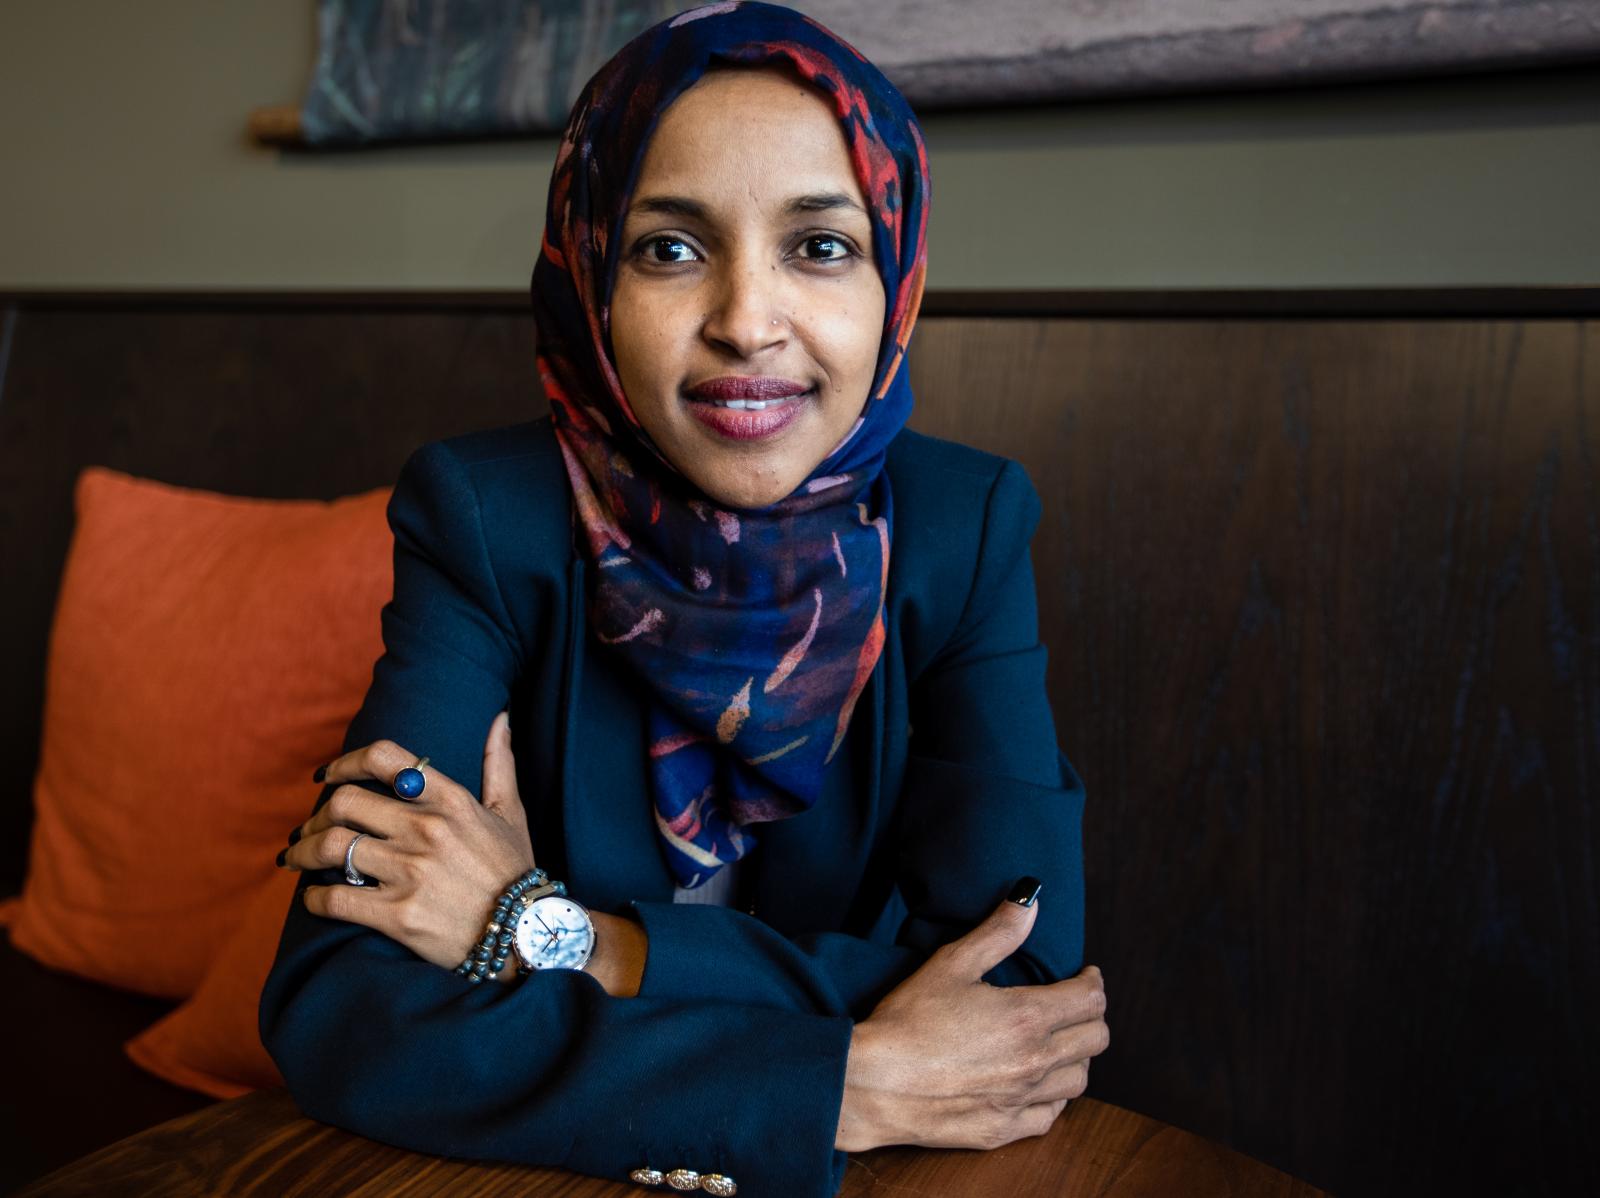 Representative-elect Ilhan Omar, a Democrat from Minnesota and one of the first muslim women to enter the Congress, poses for a portrait during an interview at a local cafe in Washington DC. Representative-elect Ilhan Omar will be sworn in next month. Photo by Eman Mohammed for Buzzfeed 